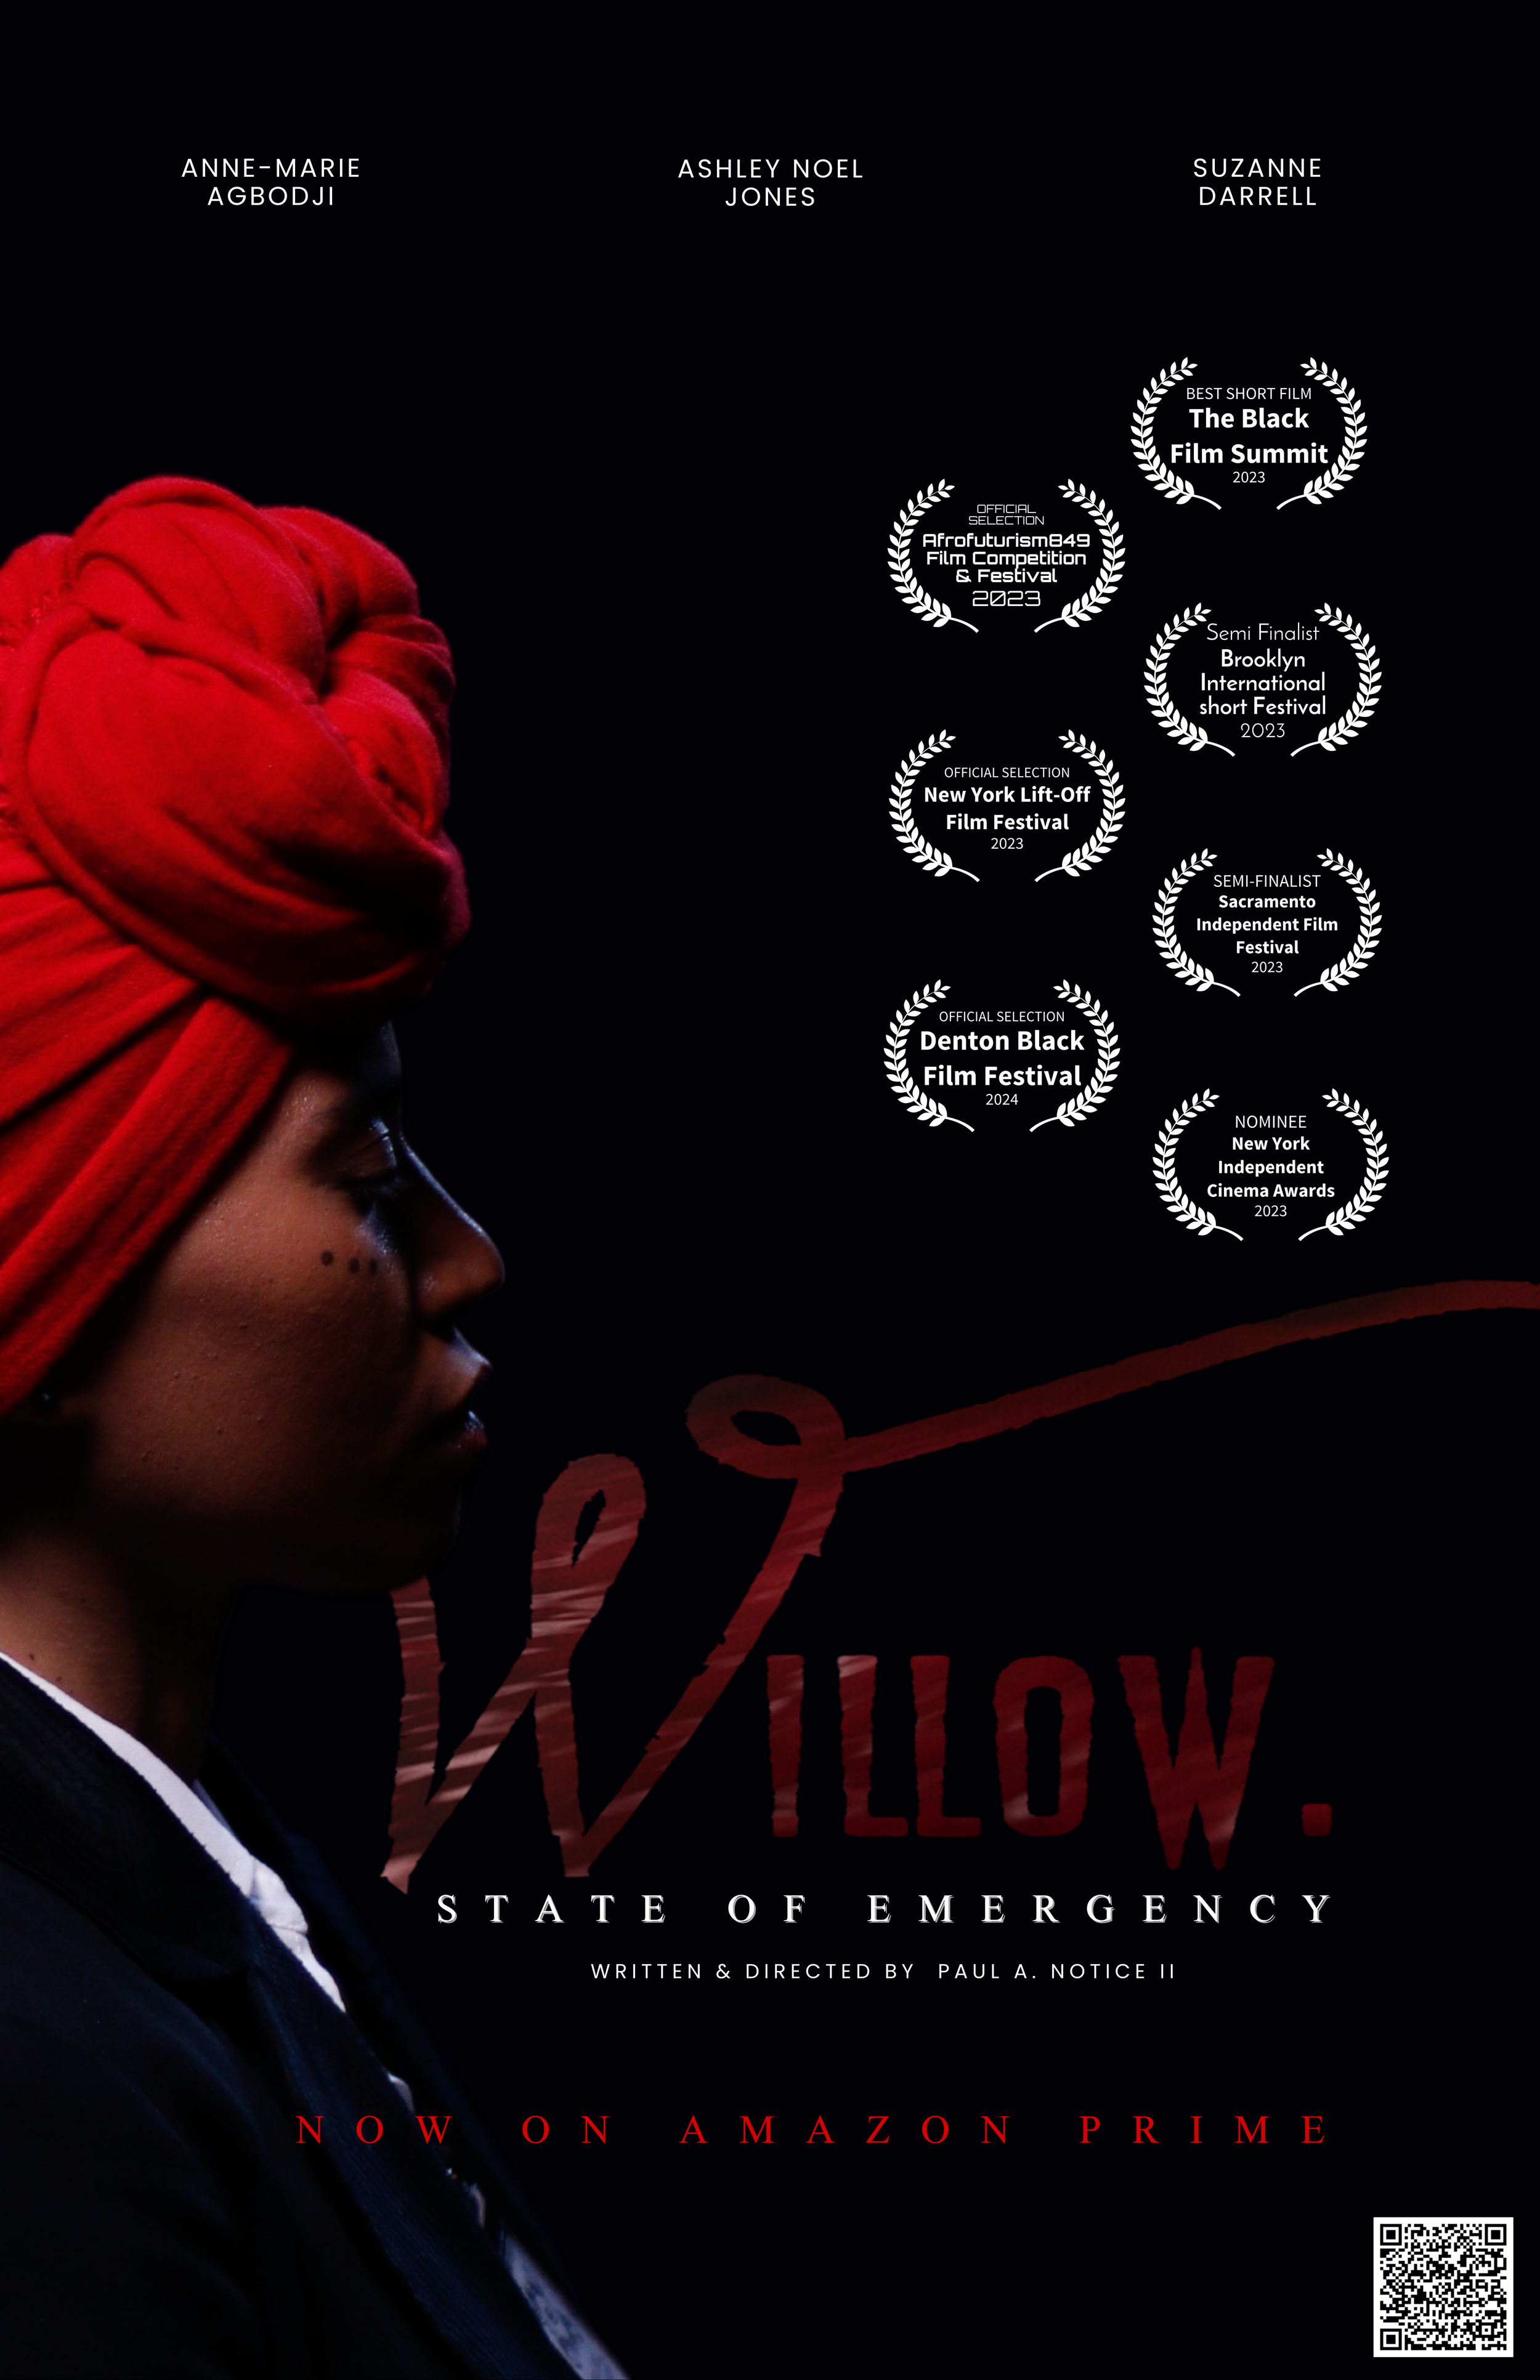 Willow movie release (11 x 17 cm) a.png